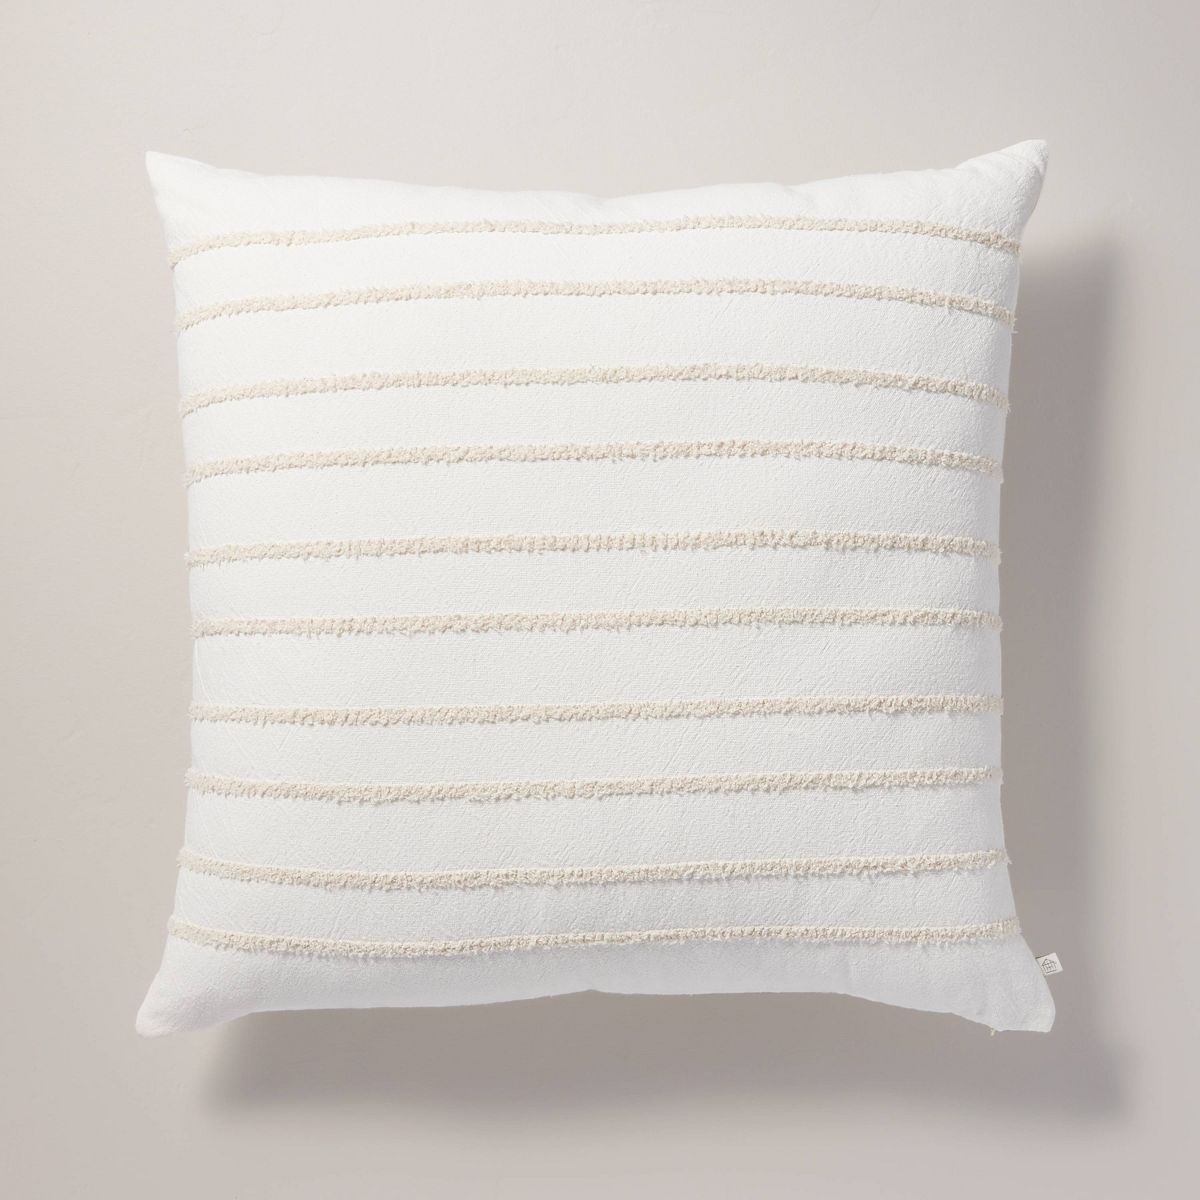 26"x26" Tufted Rib Stripe Euro Bed Pillow Cream/Natural - Hearth & Hand™ with Magnolia | Target